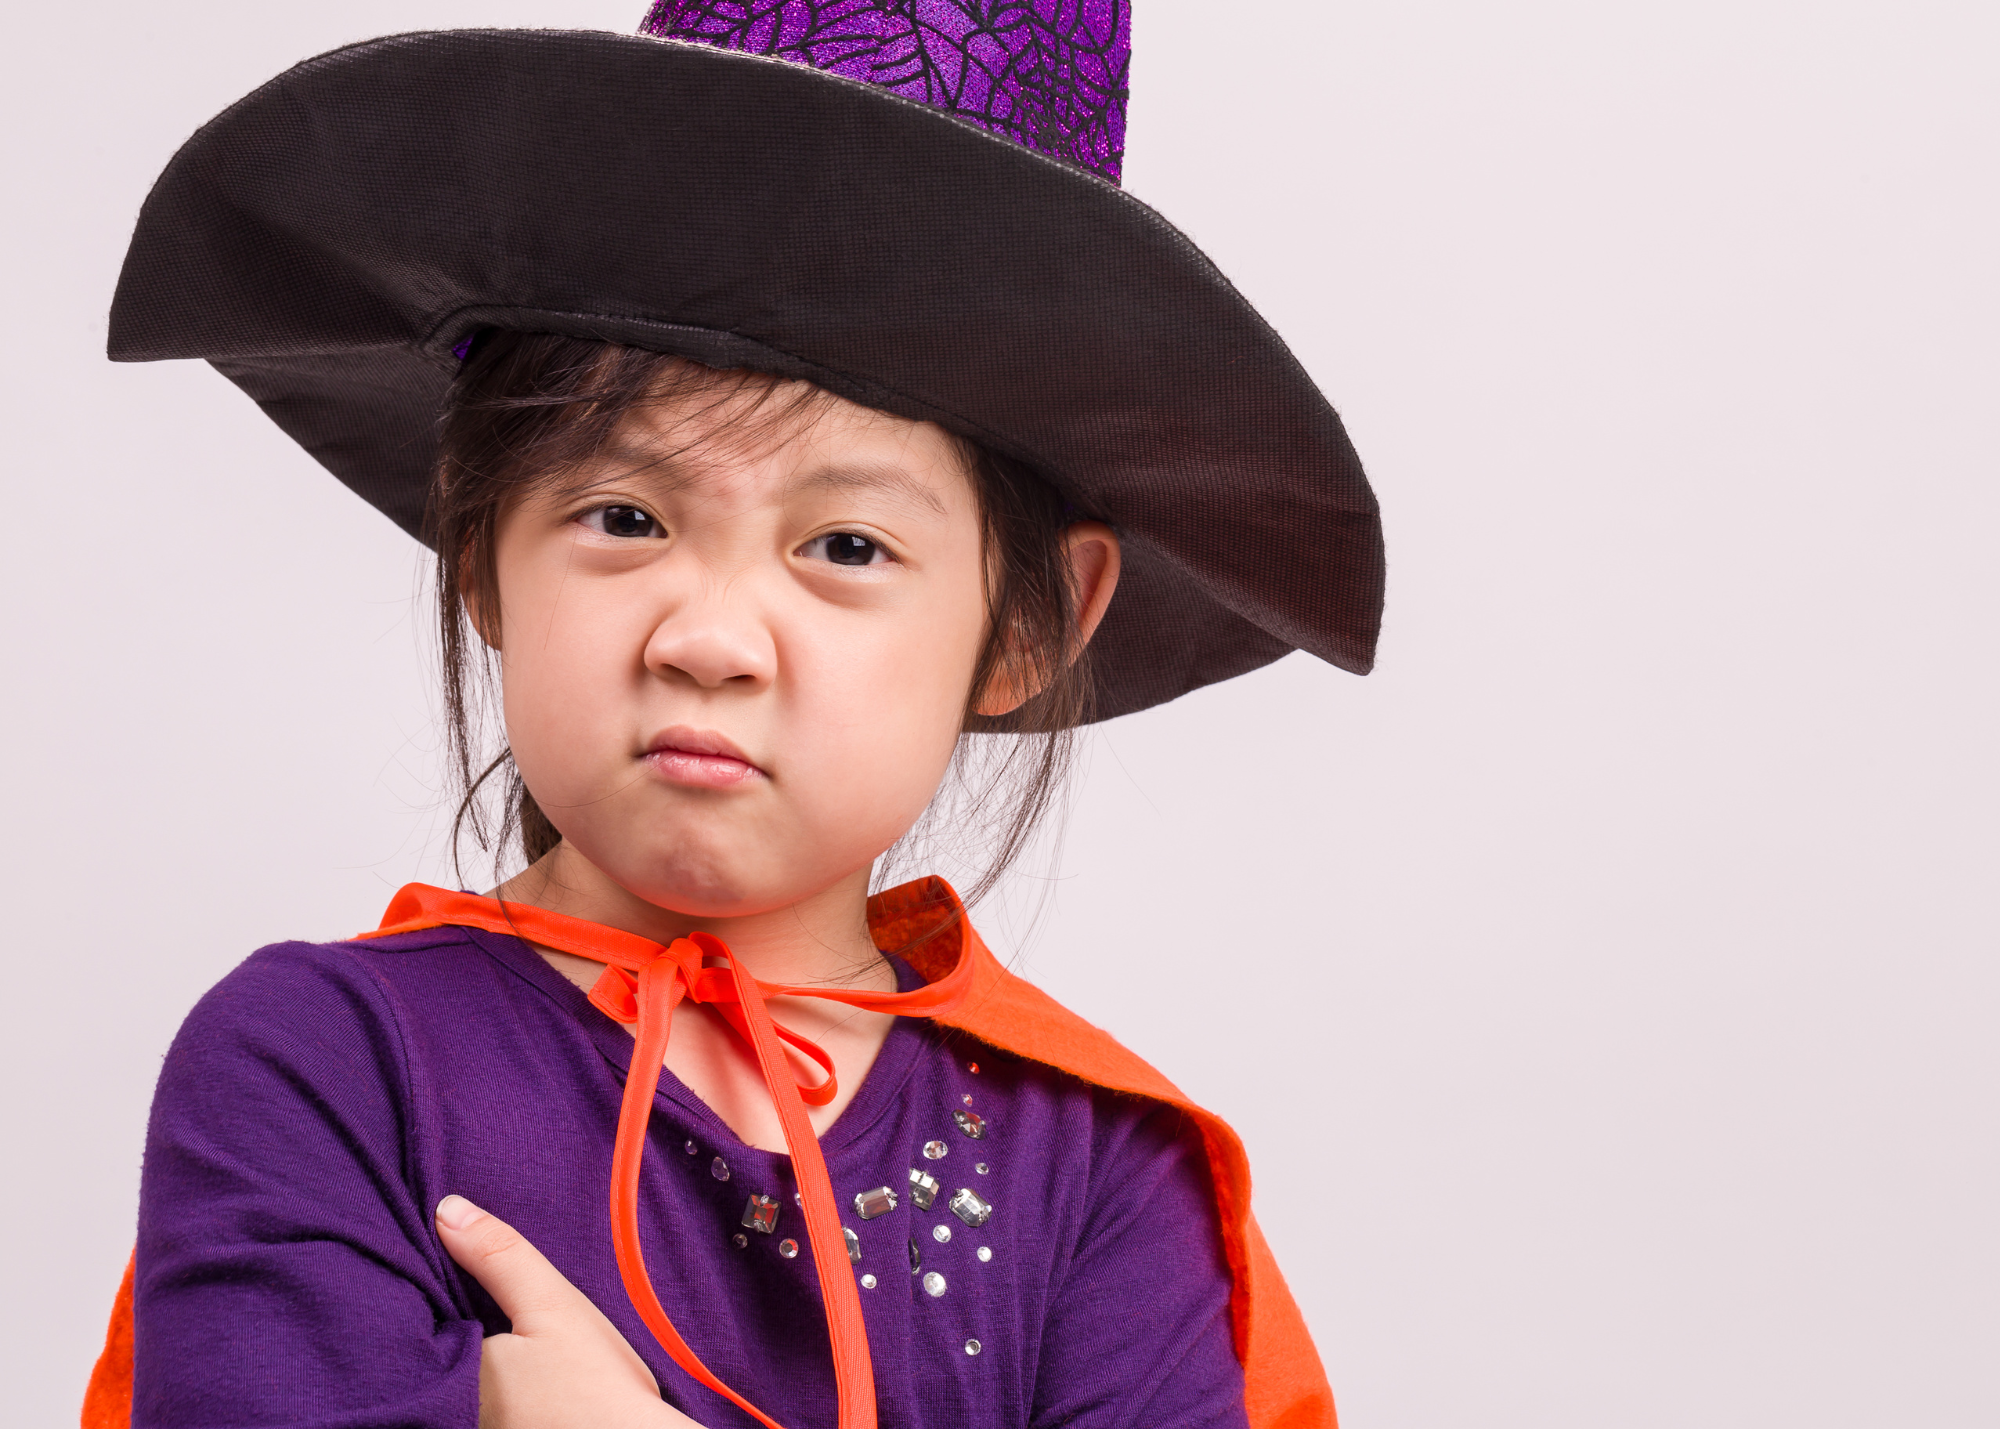 Sensory Friendly Halloween Costumes for Children with Autism